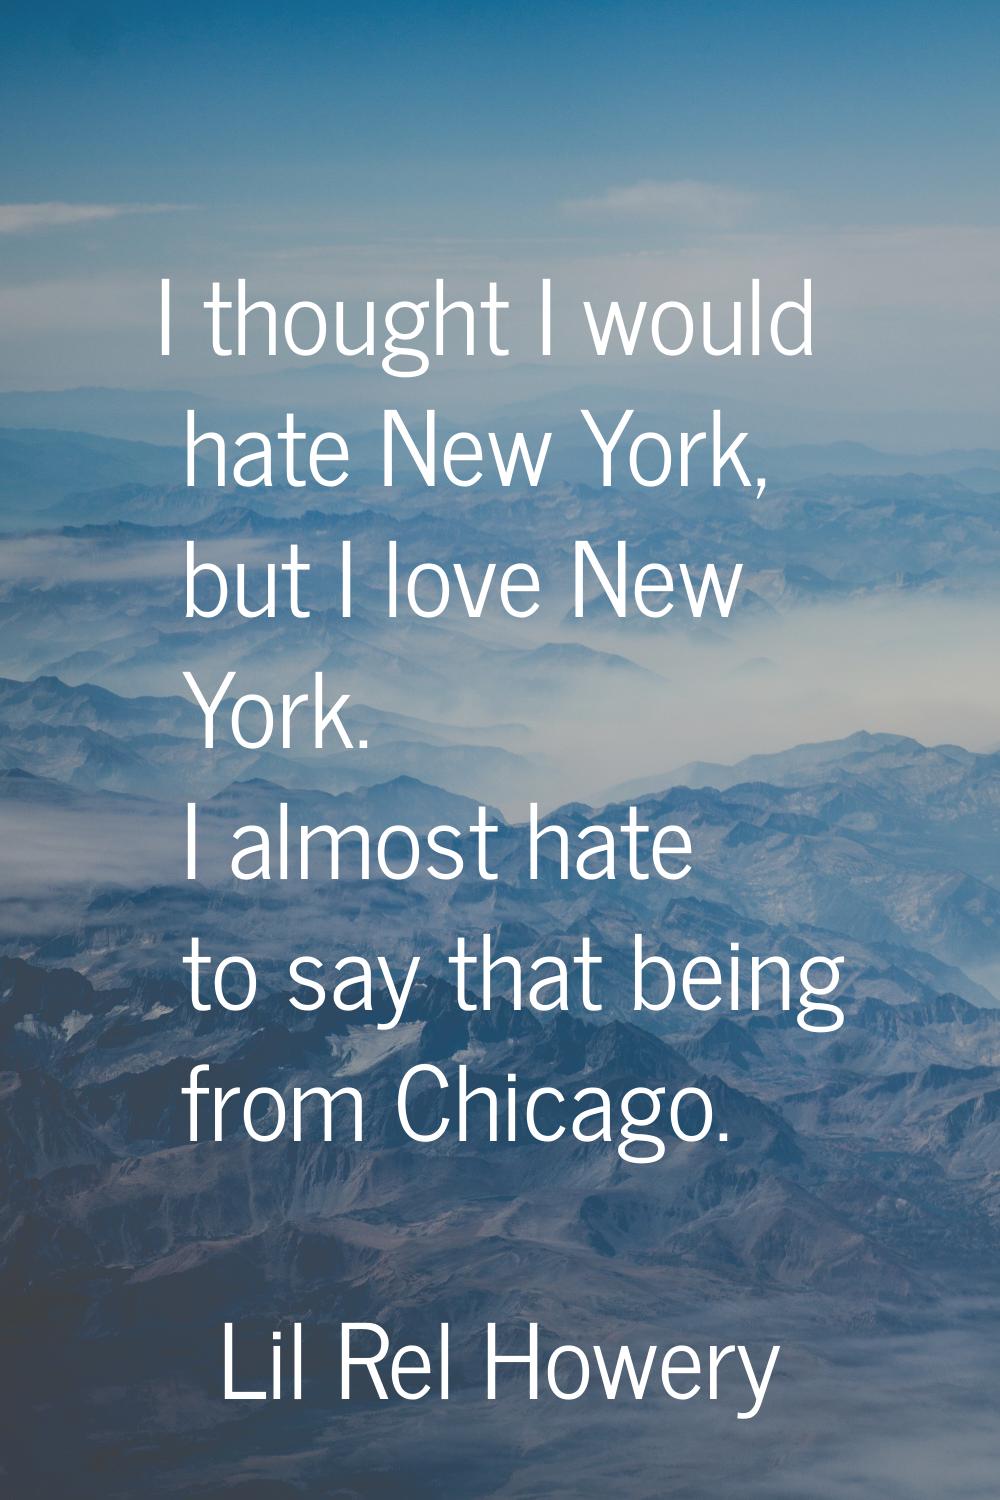 I thought I would hate New York, but I love New York. I almost hate to say that being from Chicago.